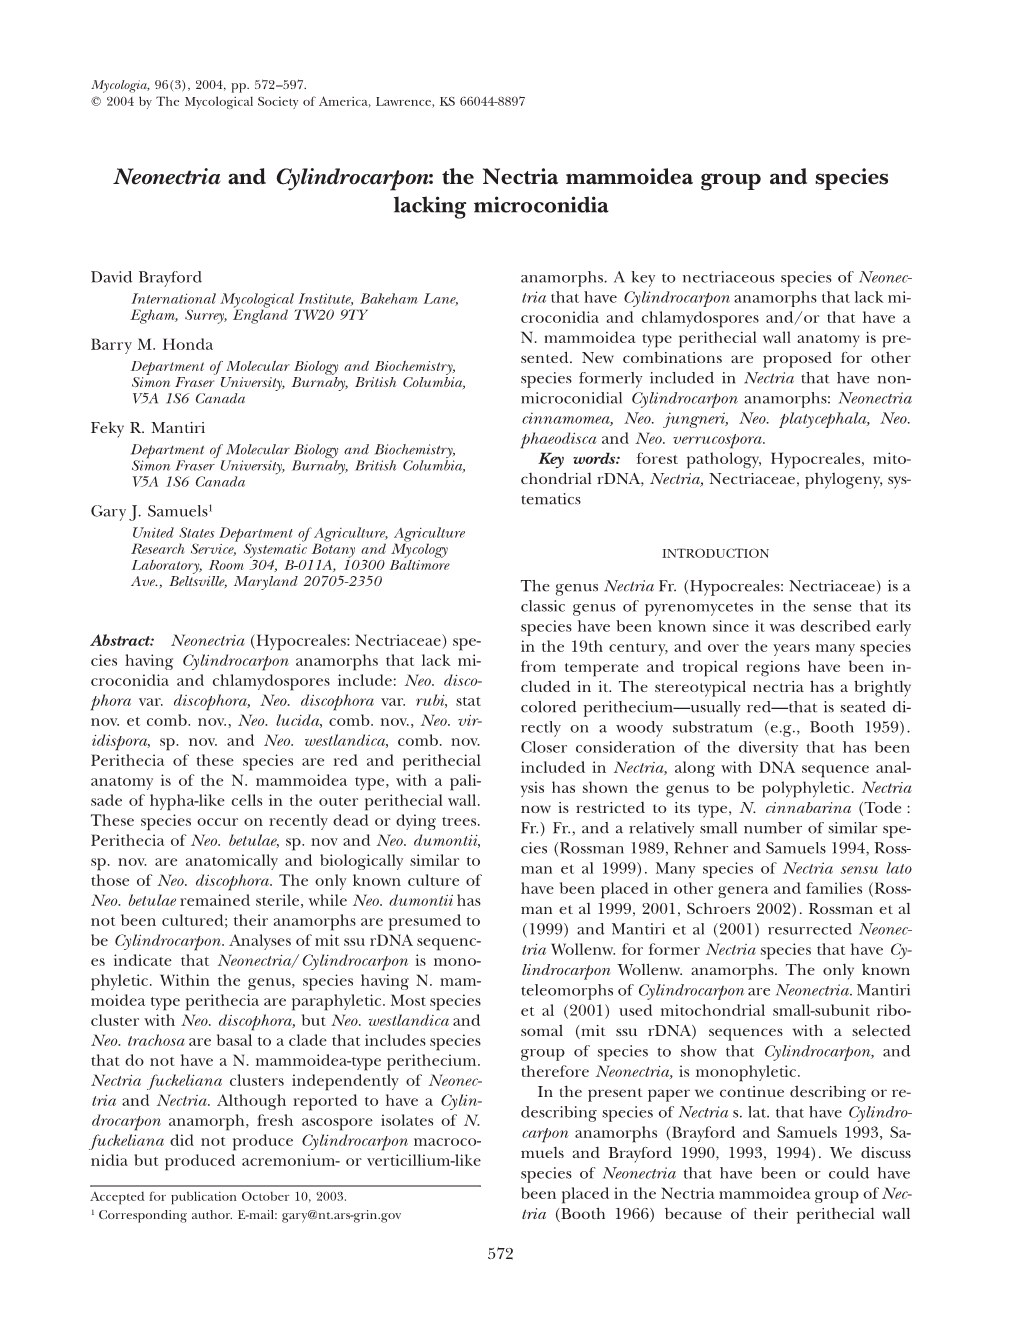 Neonectria and Cylindrocarpon: the Nectria Mammoidea Group and Species Lacking Microconidia